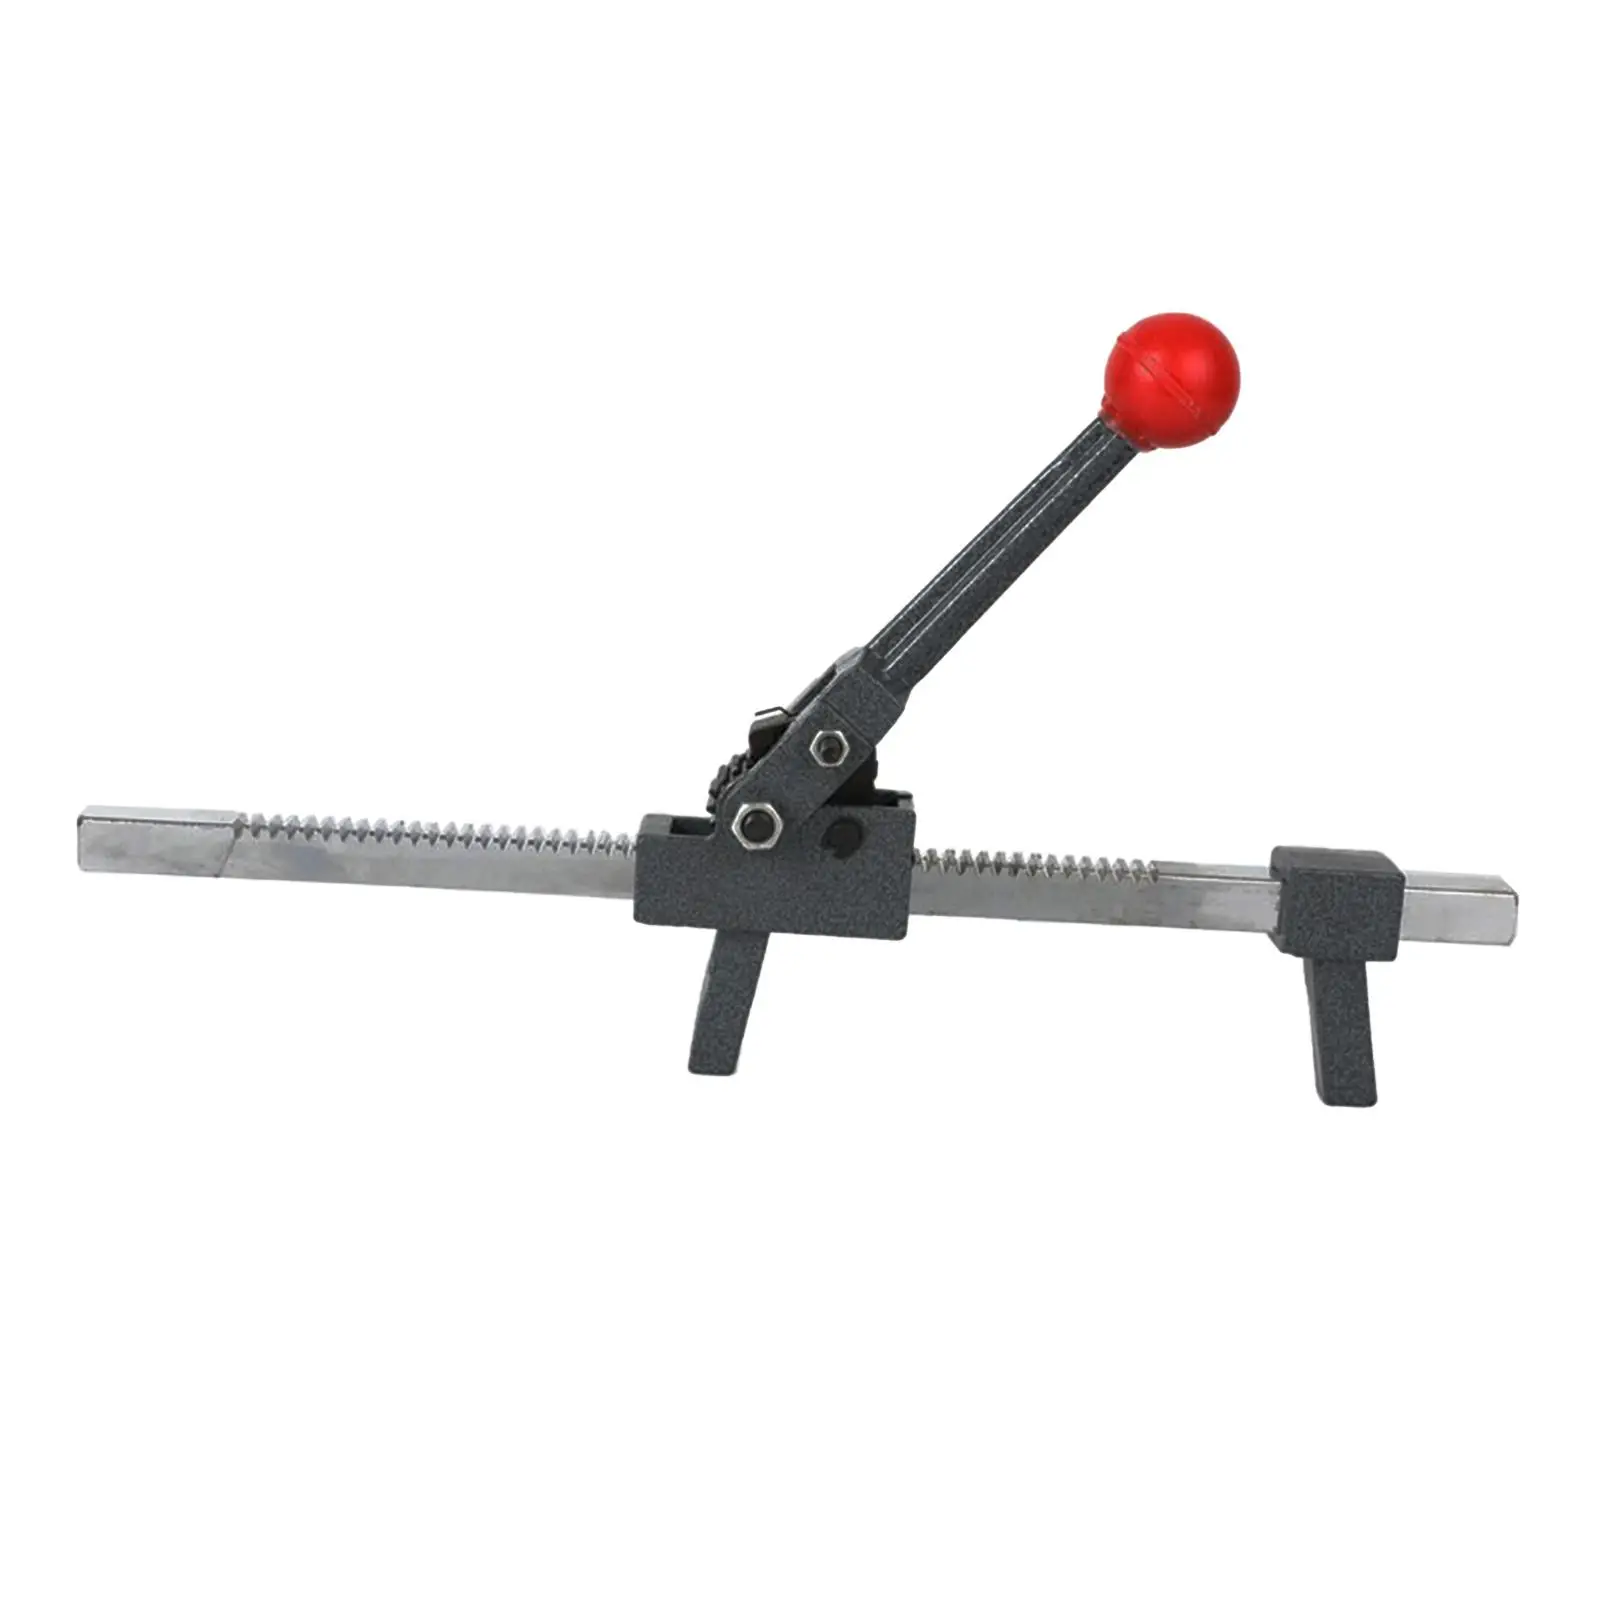 Manual Tire Changer Bead Breaker Premium Easy to Use Tire Changing Tool